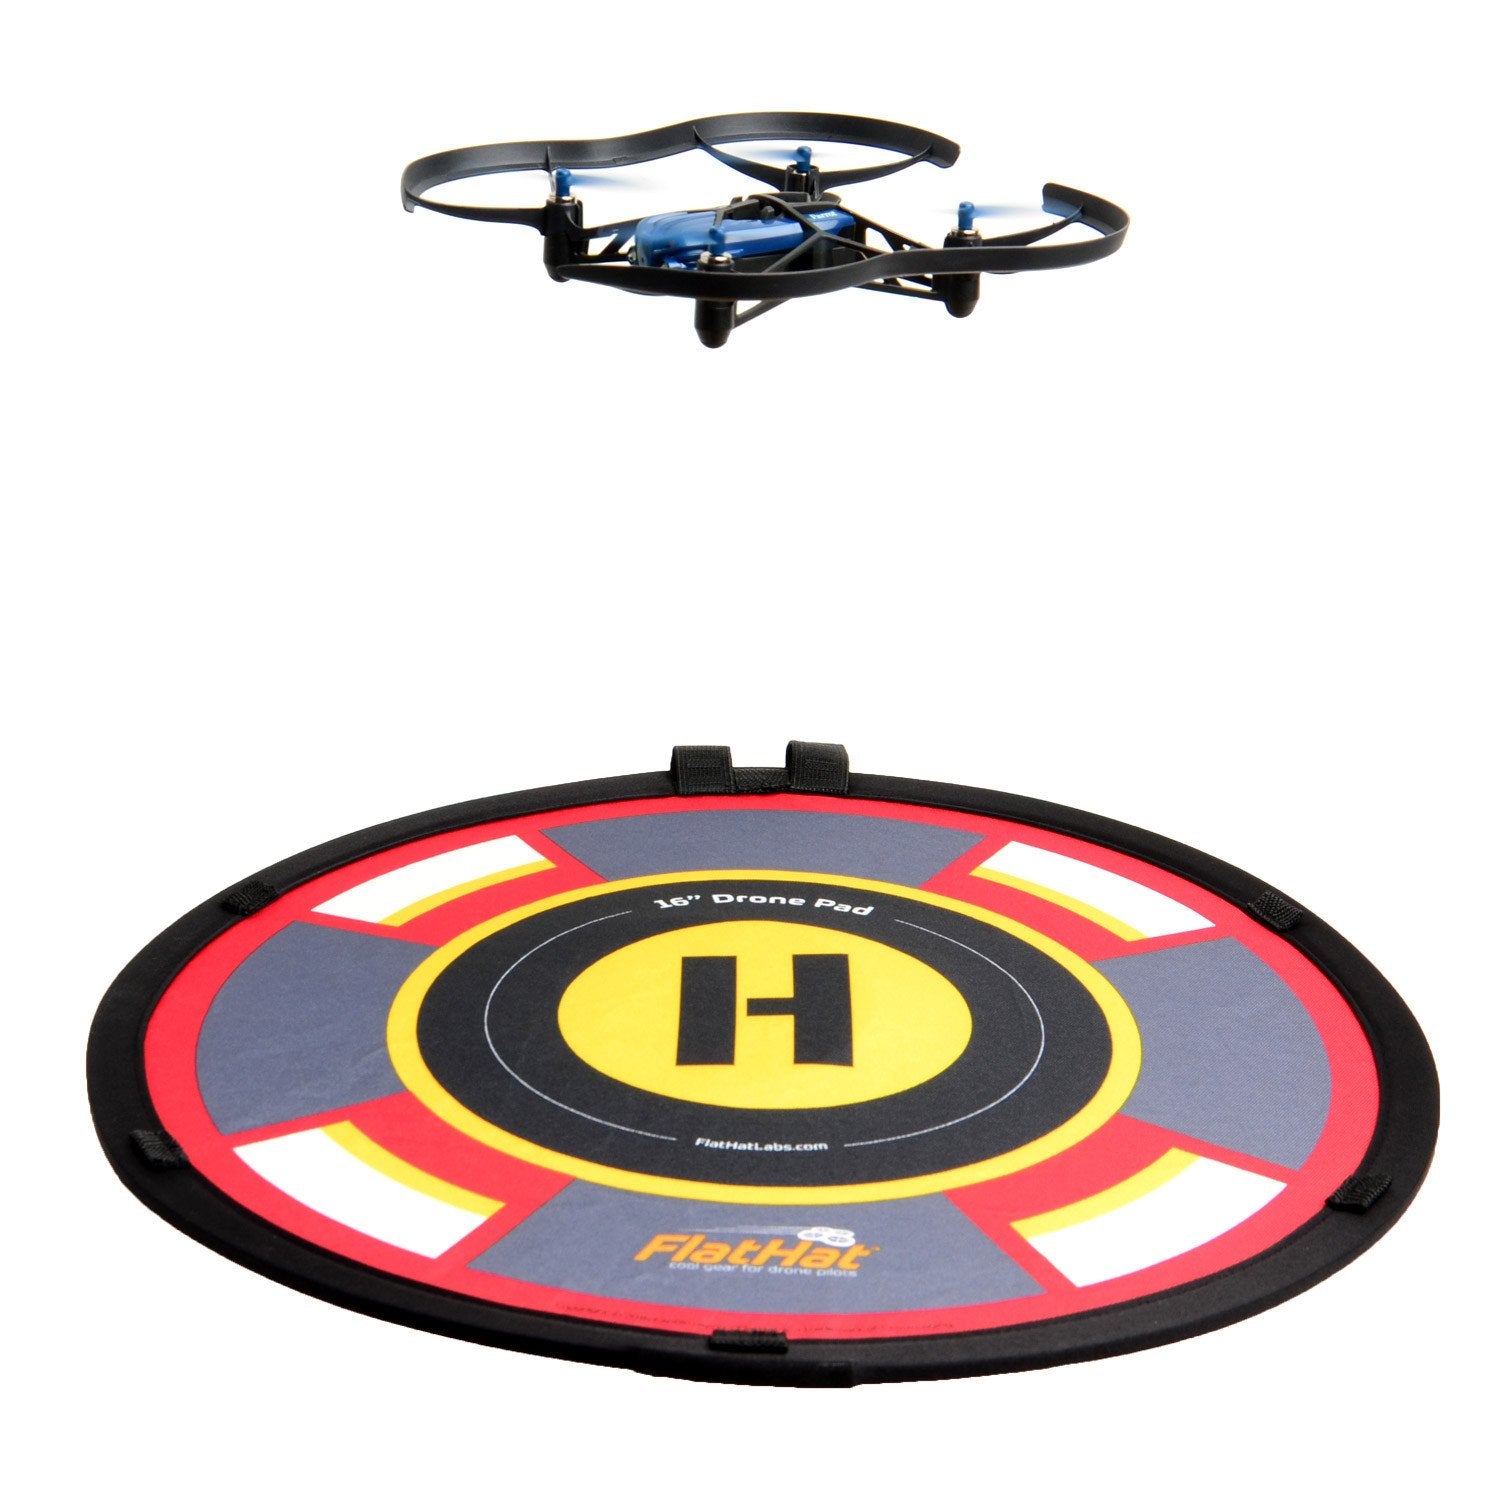 FlatHat 16" (40cm) Collapsible Drone Pad - Red Gold - Photo-Video - ExpoImaging - Helix Camera 